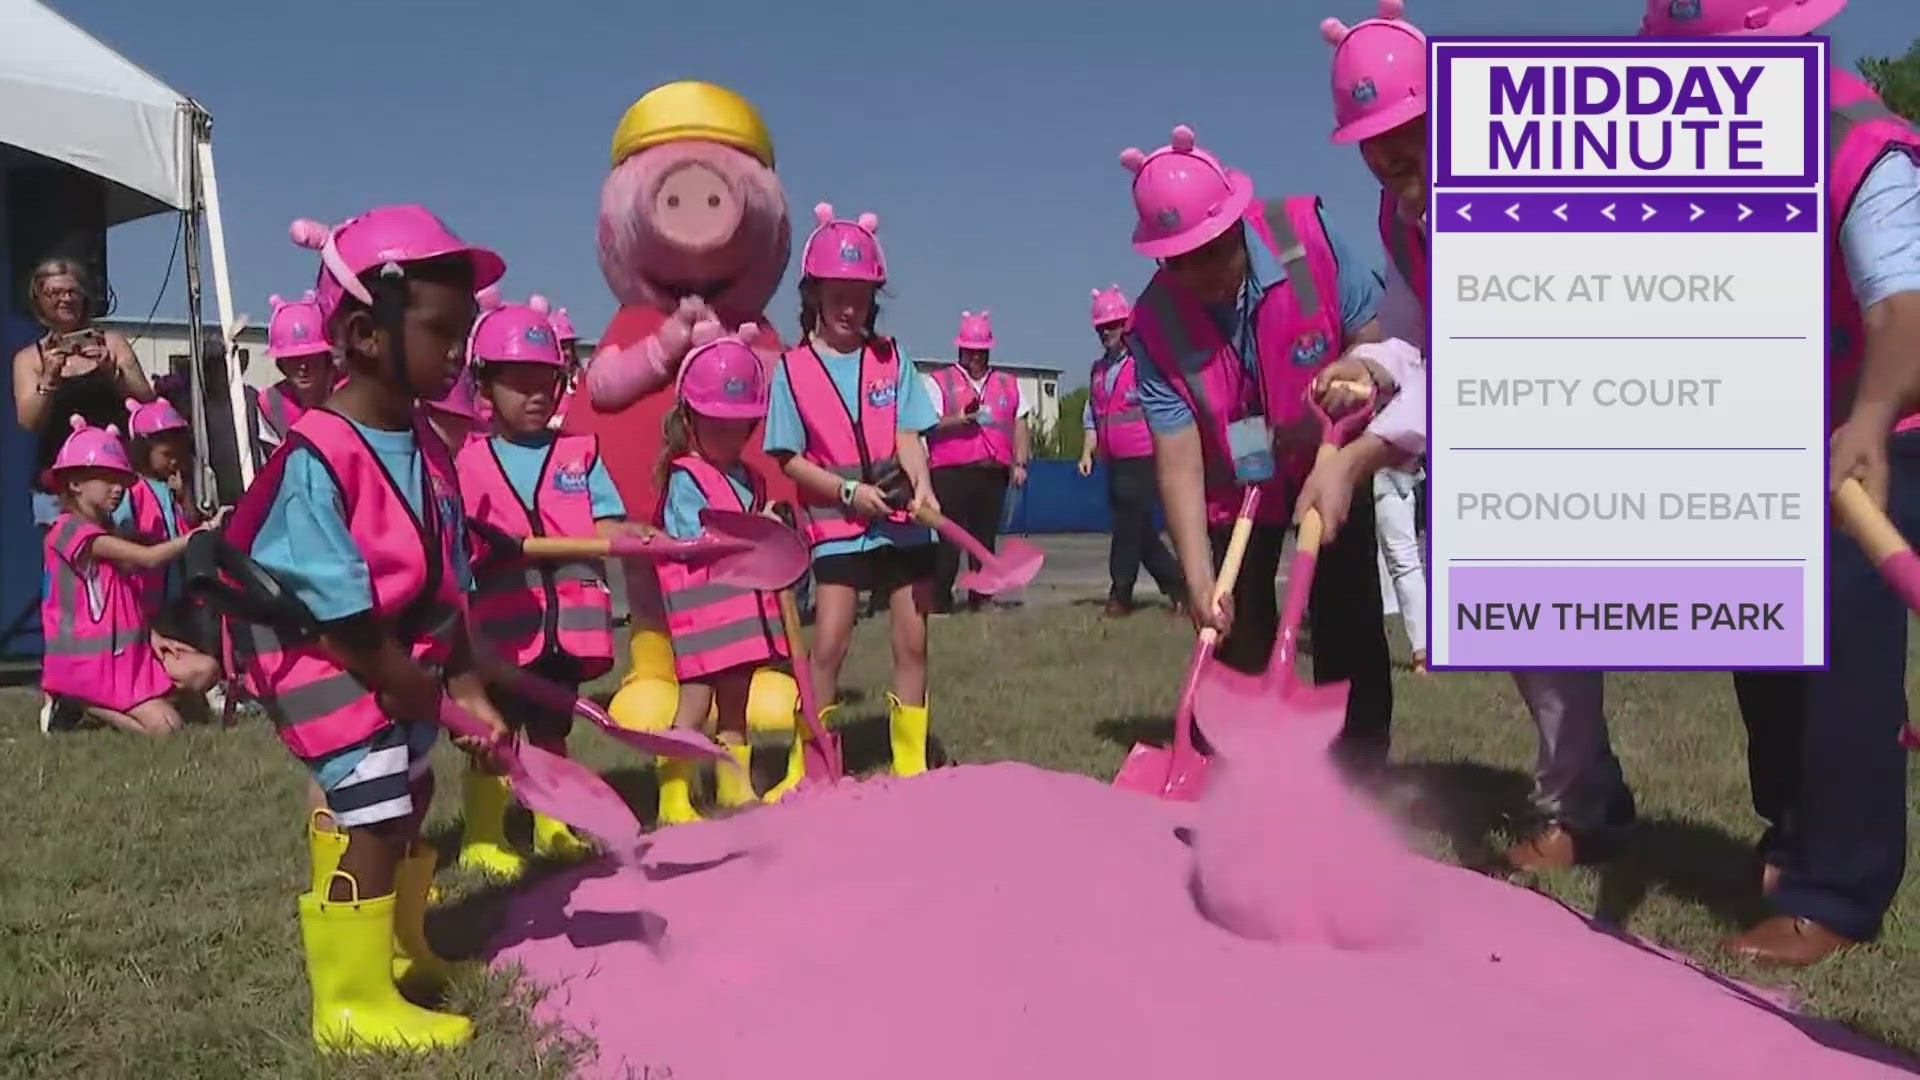 A ground breaking ceremony was held on June 28 for a Peppa Pig Theme Park in North Richland Hills, off Boulevard 26 next door to the NRH2O Family Water Park.